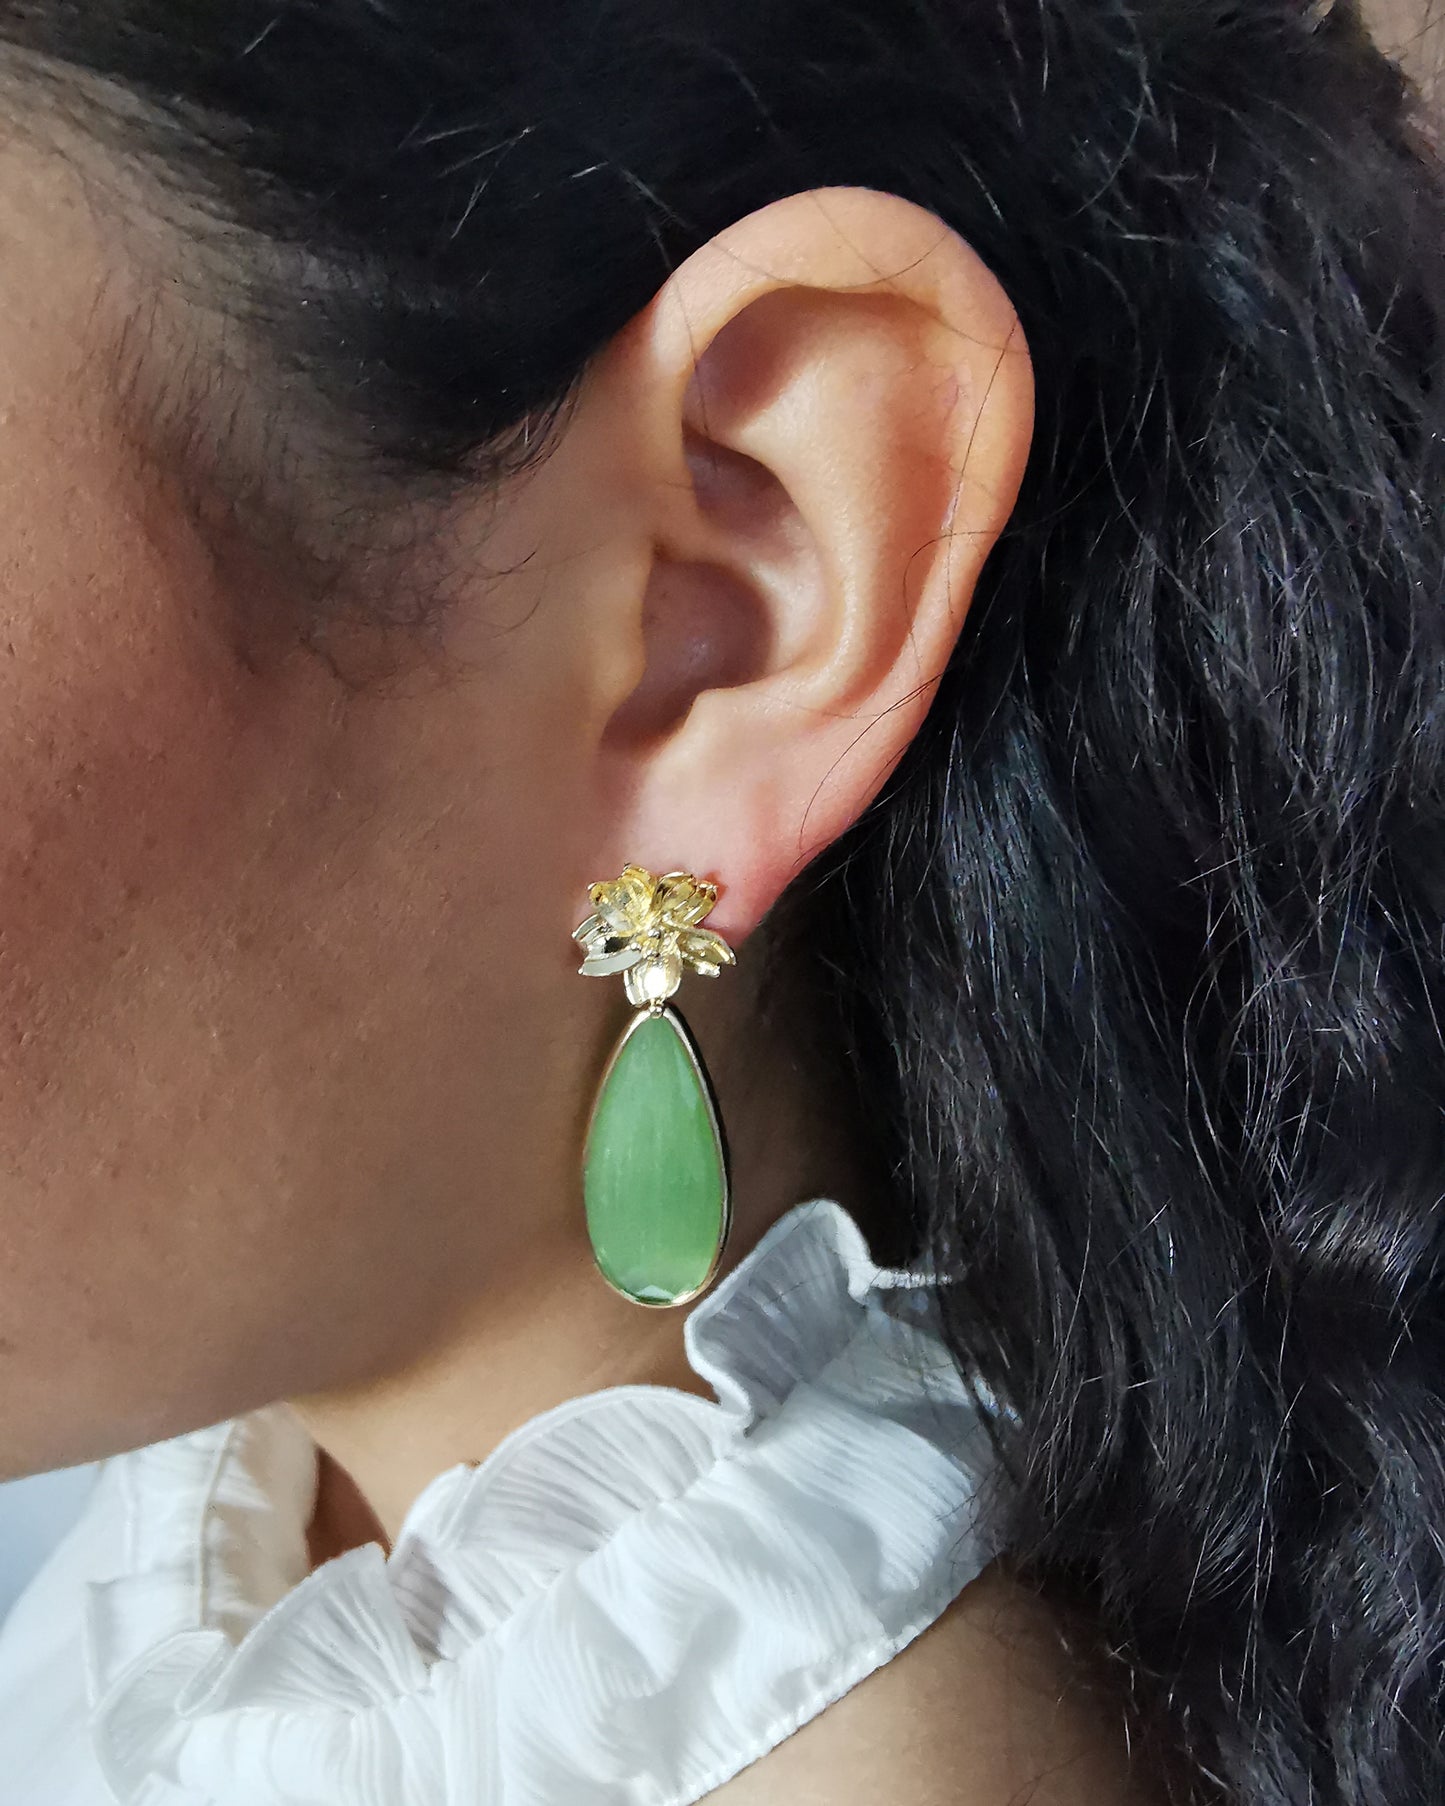 Apple Green Monalisa Statement Earrings with Floral Ear Post - LIMITED EDITION